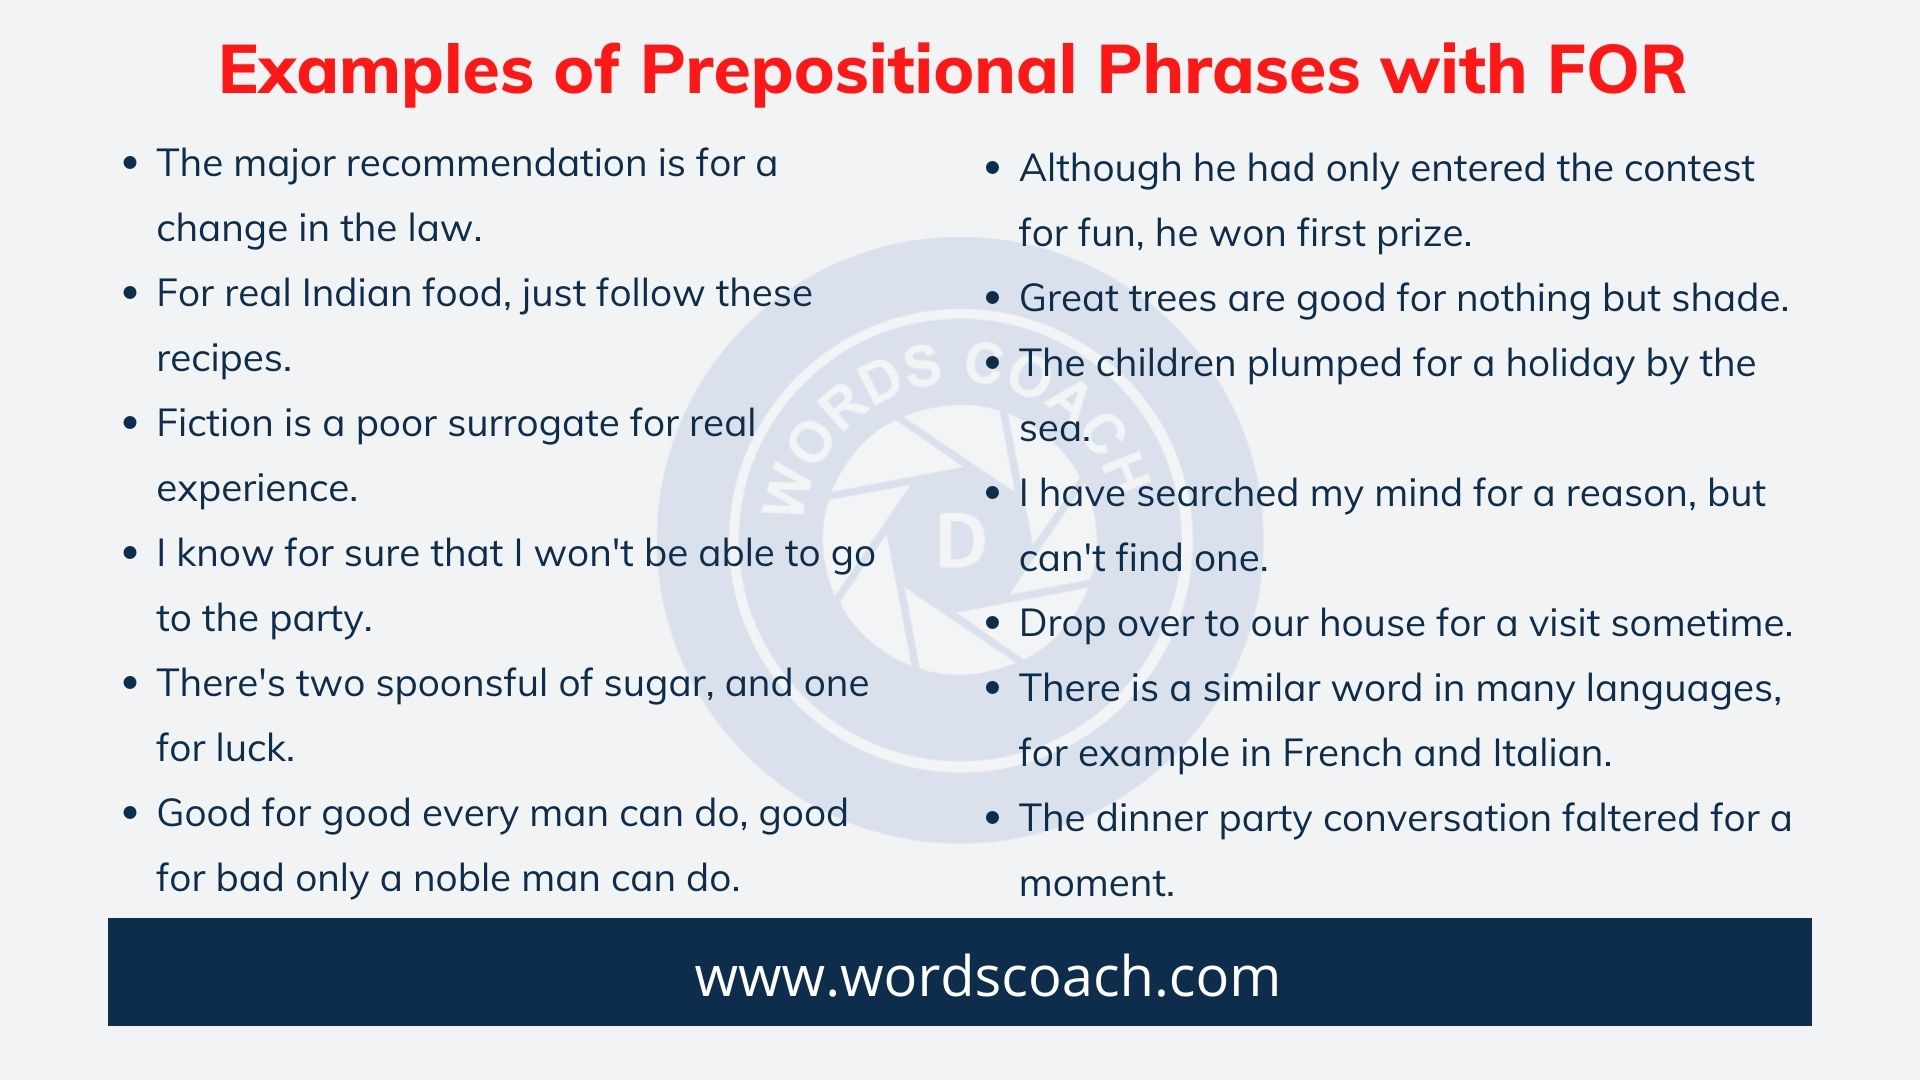 Examples of Prepositional Phrases with FOR - wordscoach.com